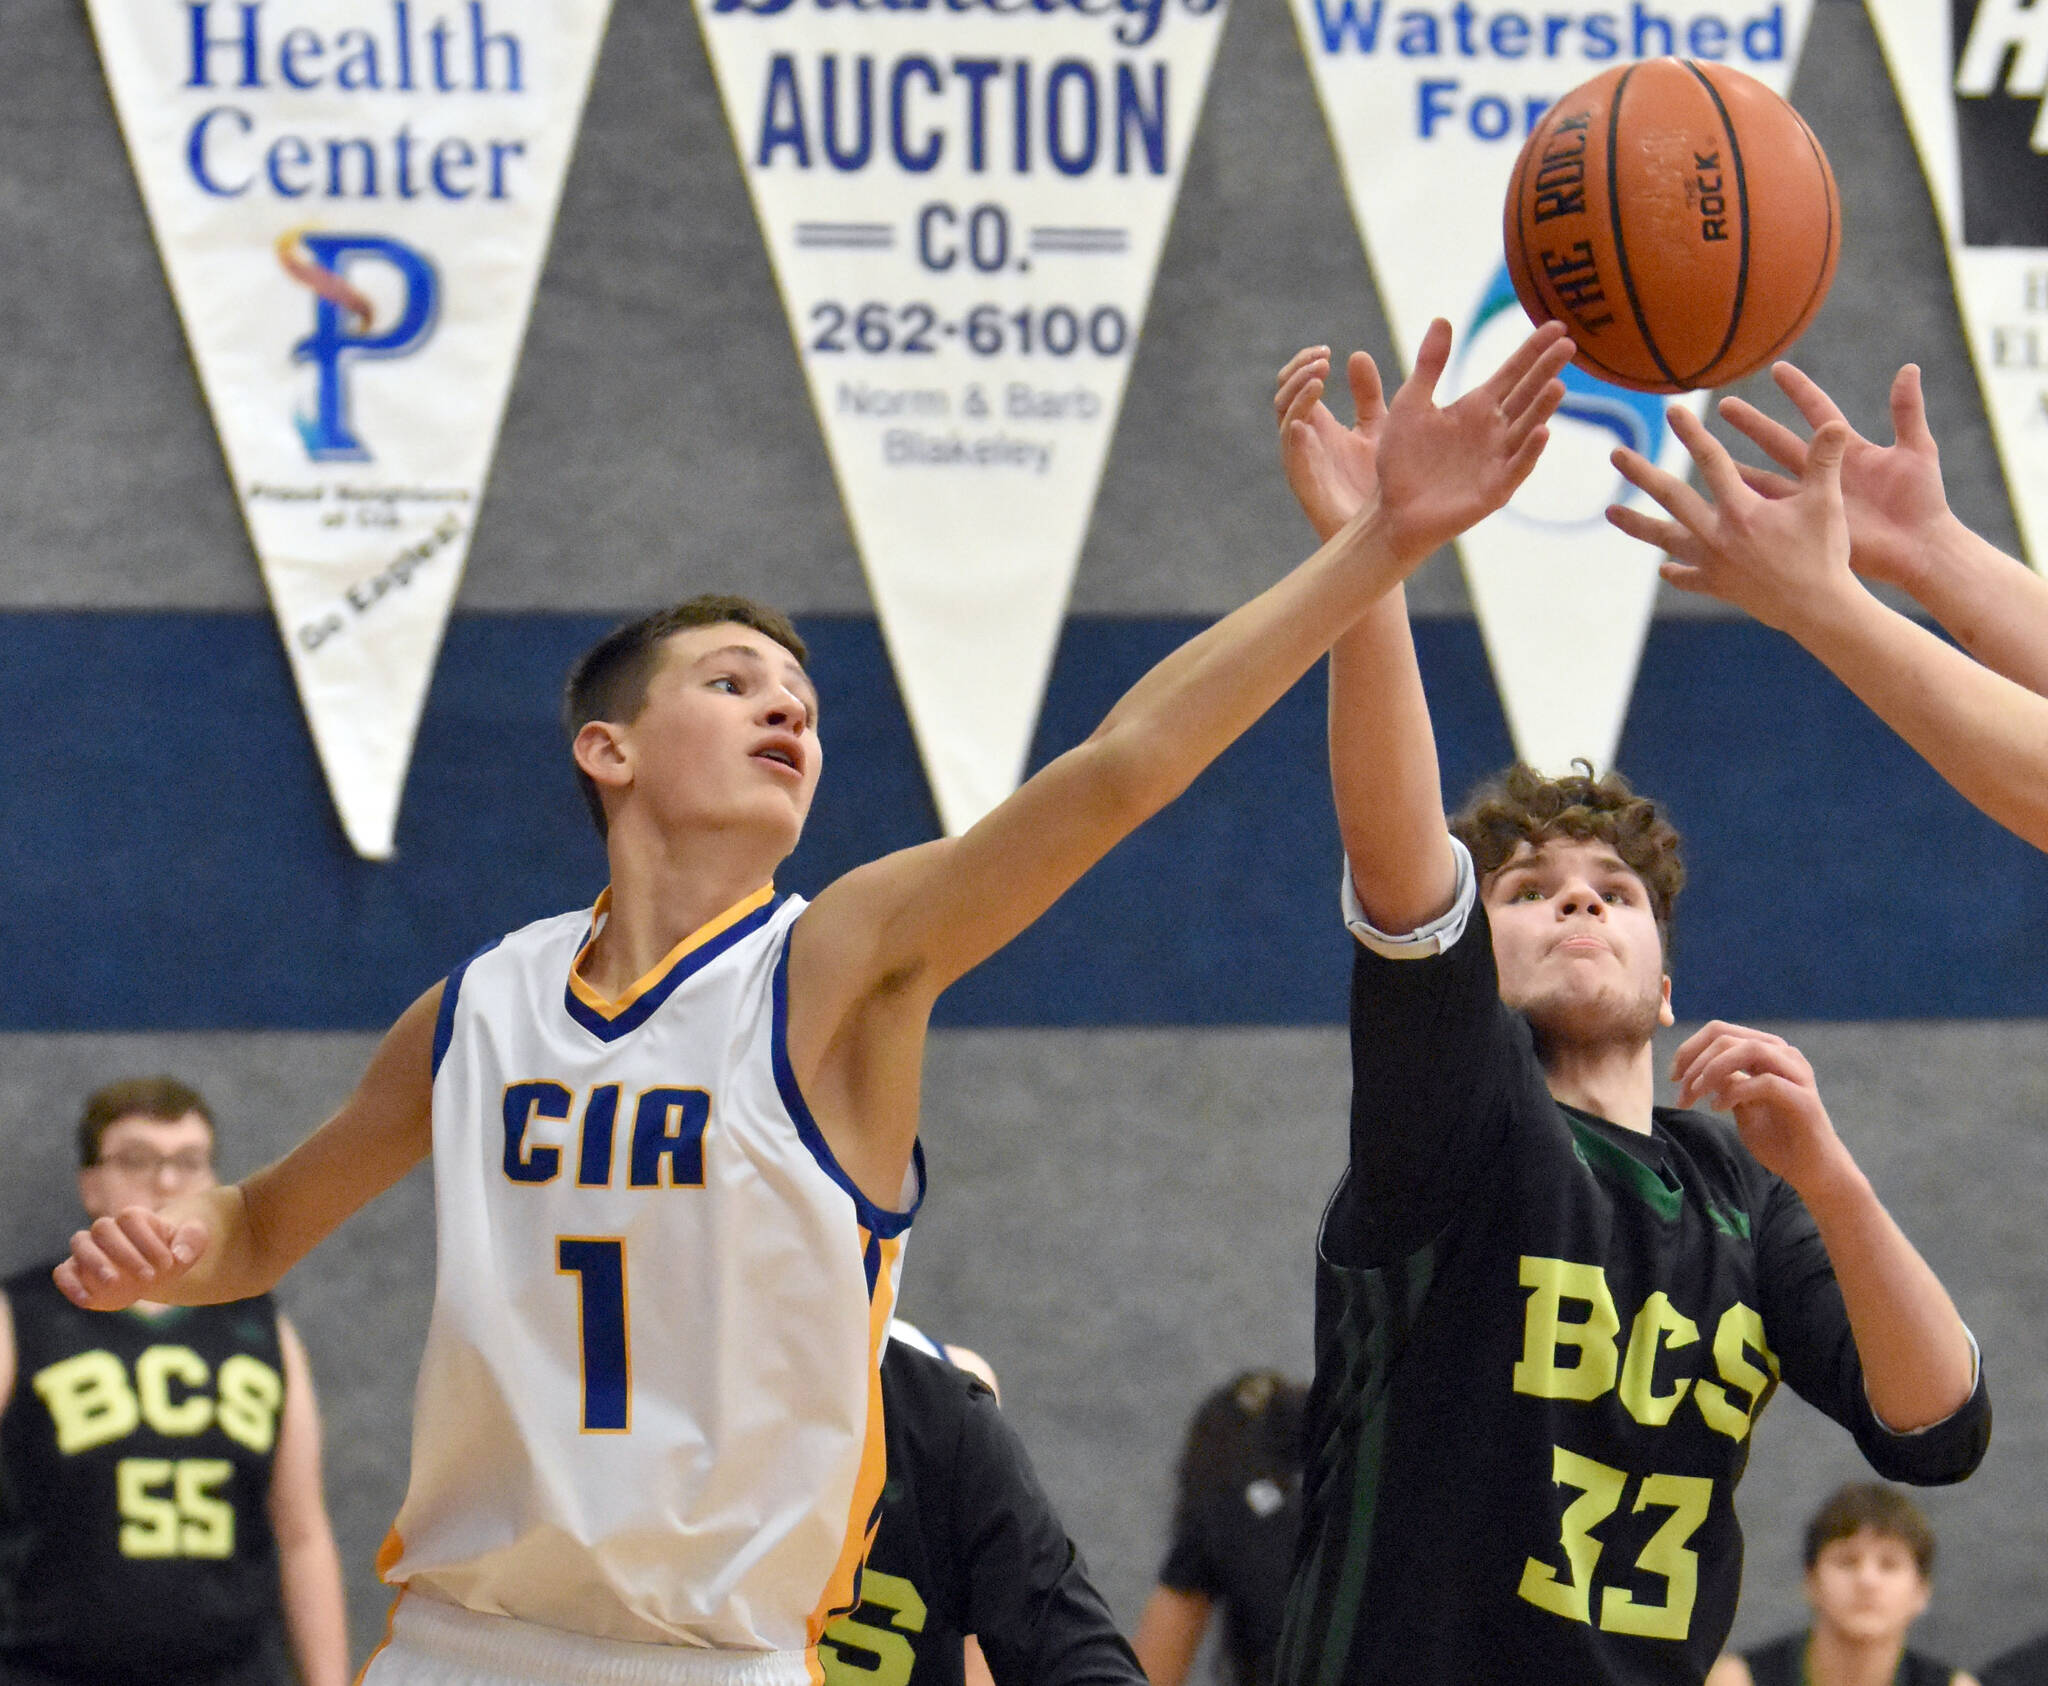 Cook Inlet Academy’s Alek McGarry battles for a rebound against Birchwood Christian on Saturday, Jan. 21, 2023, at Cook Inlet Academy just outside of Soldotna, Alaska. (Photo by Jeff Helminiak/Peninsula Clarion)